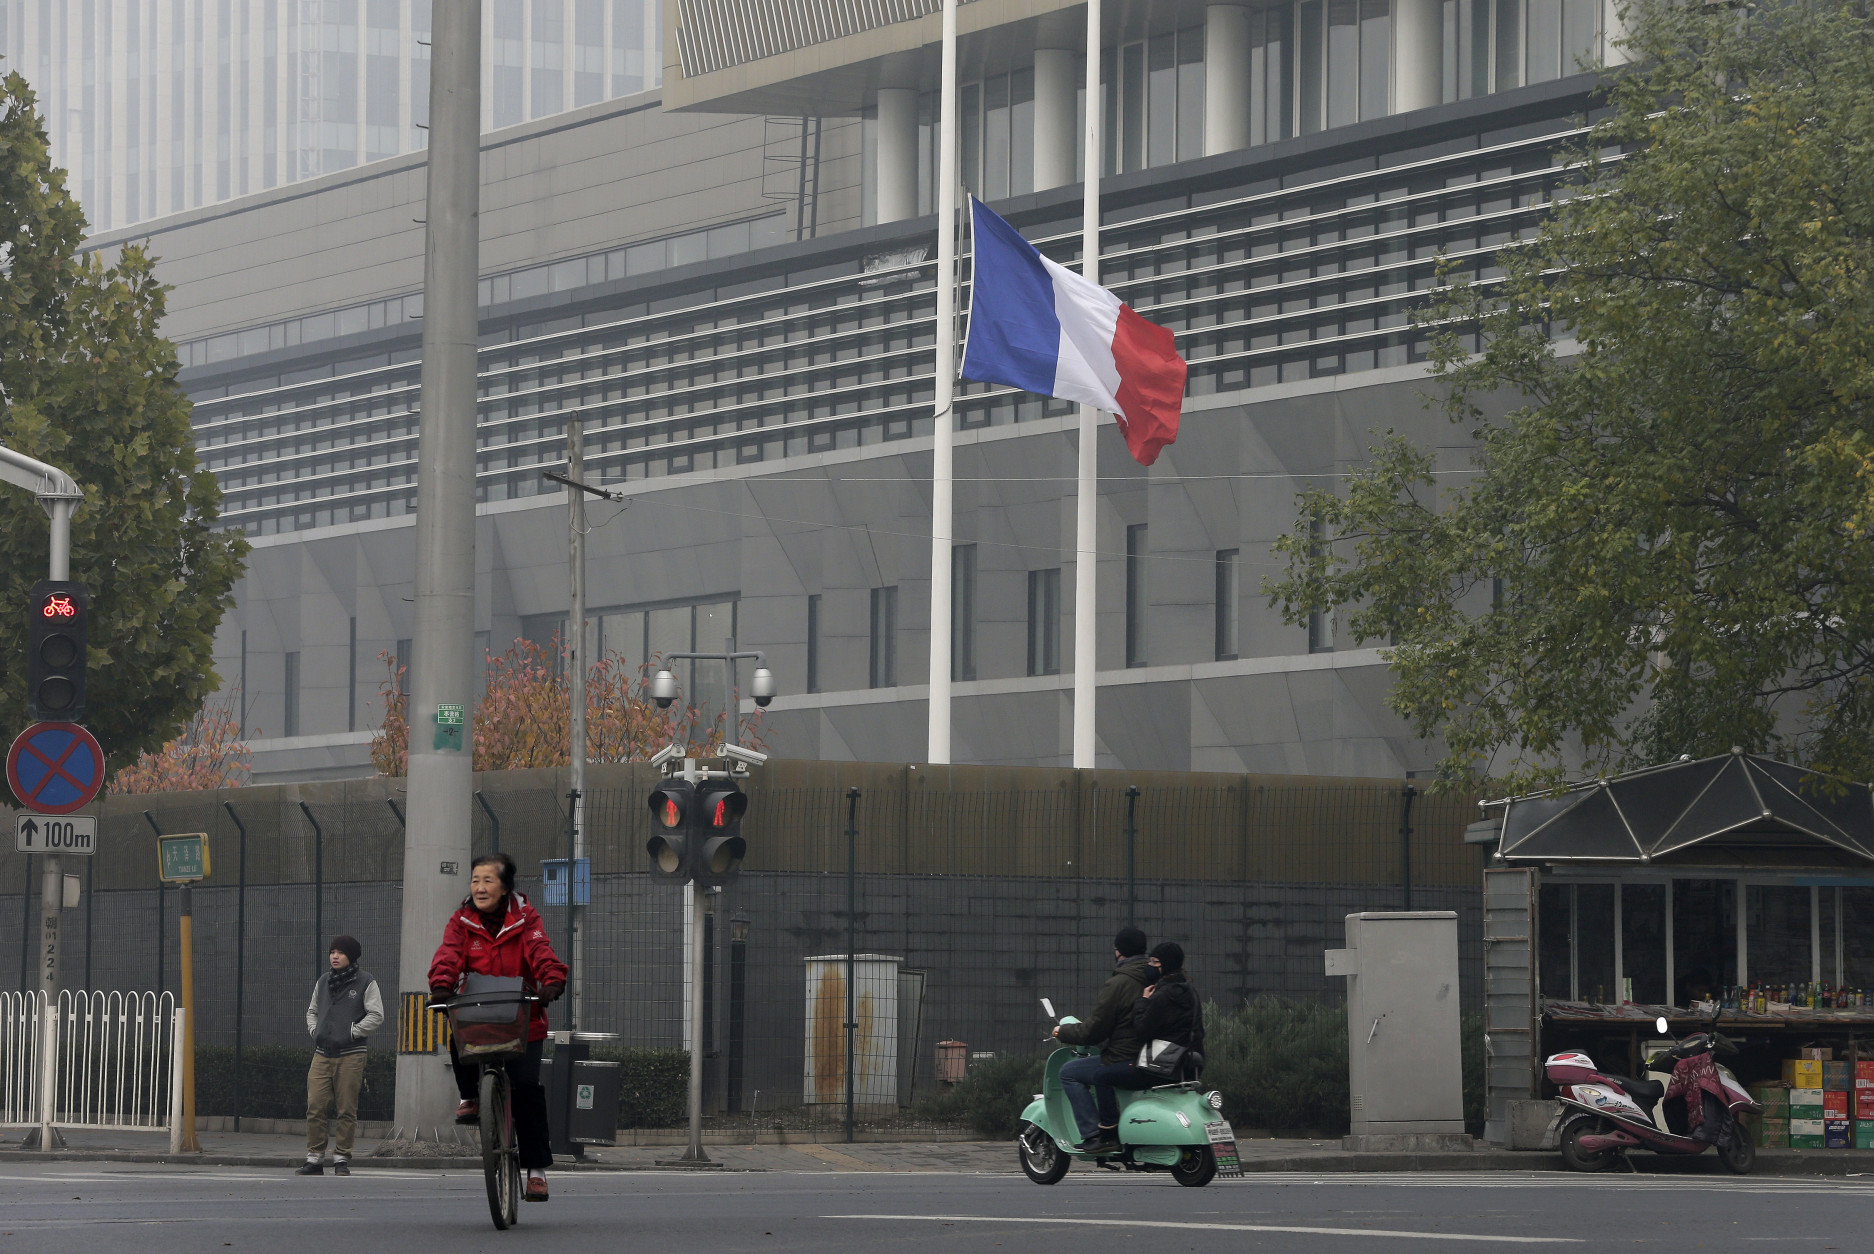 A cyclist and a motorist drive past a French national flag fluttering at half-mast to mourn for the victims killed in the Friday's attacks in Paris, France, at the French Embassy compound in Beijing, China, Saturday, Nov. 14, 2015. Foreign Ministry spokesman Hong Lei says China is "deeply shocked" by the attacks and pledged solidarity with France in combating terrorism. "Terrorism is a common challenge facing humanity. China resolutely supports France in maintaining its national security and stability and in attacking terrorism," Hong said. (AP Photo/Andy Wong)